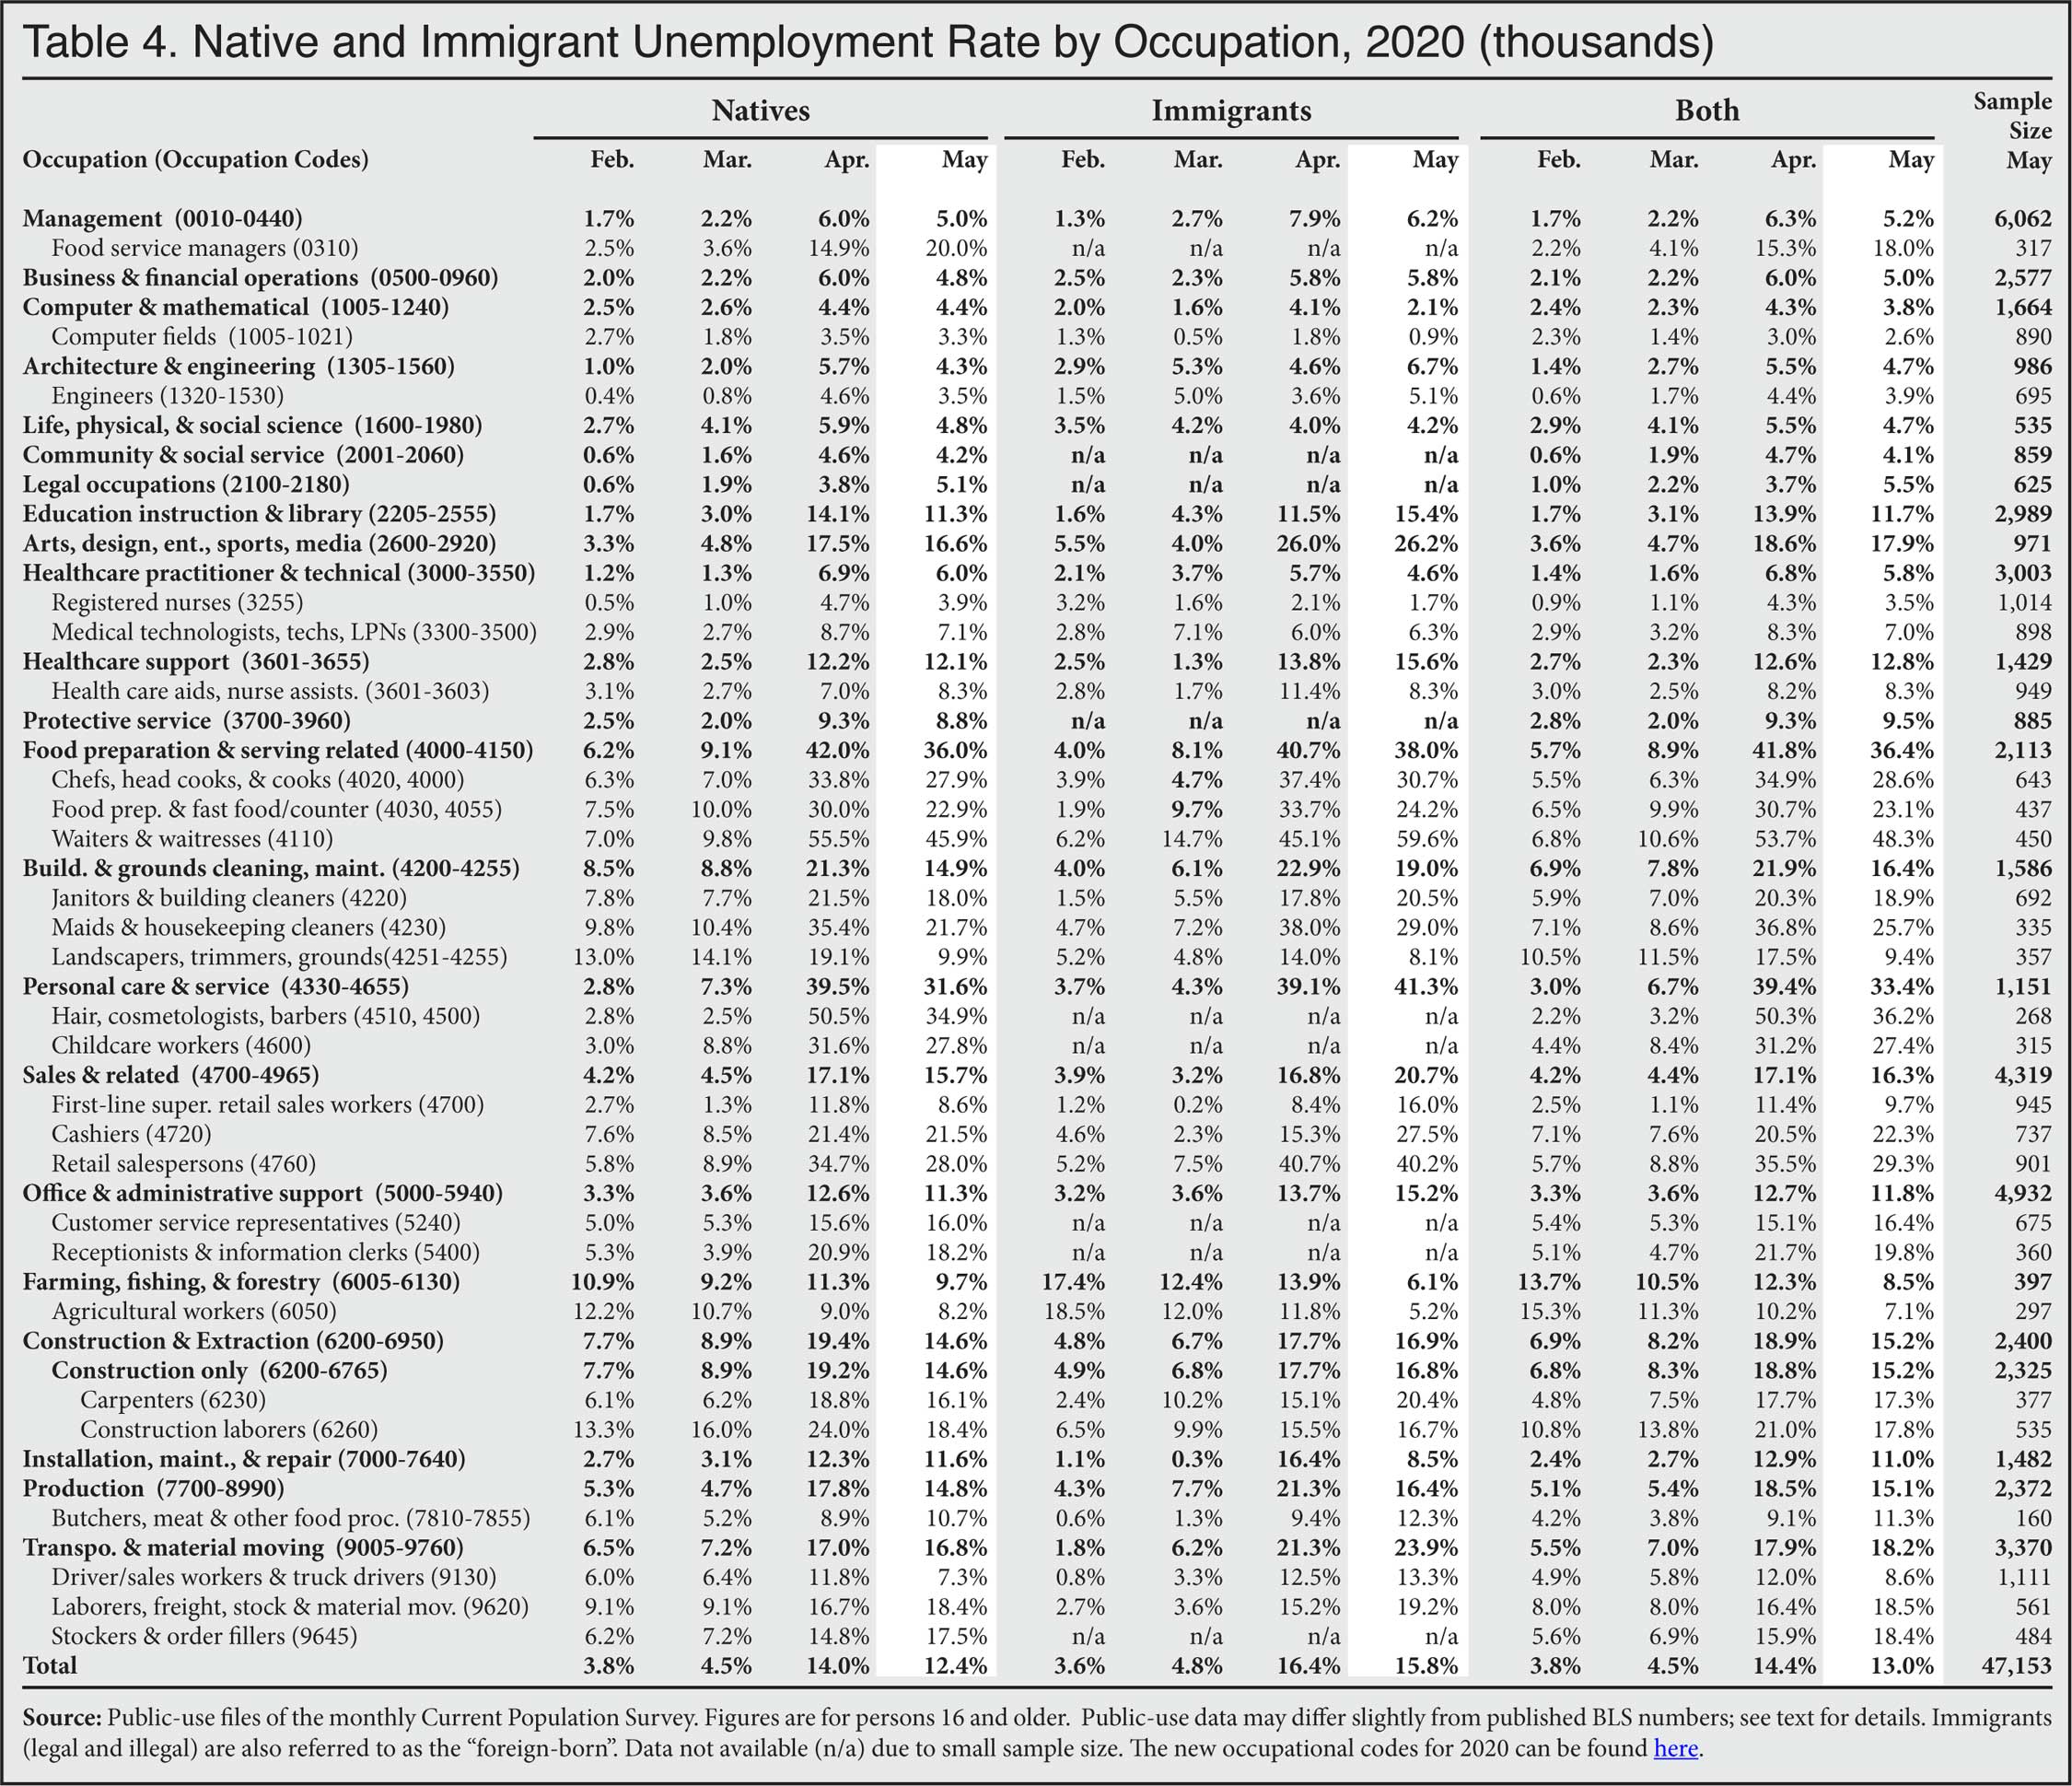 Table: Native and Immigrant Unemployment Rate by Occupation, 2020